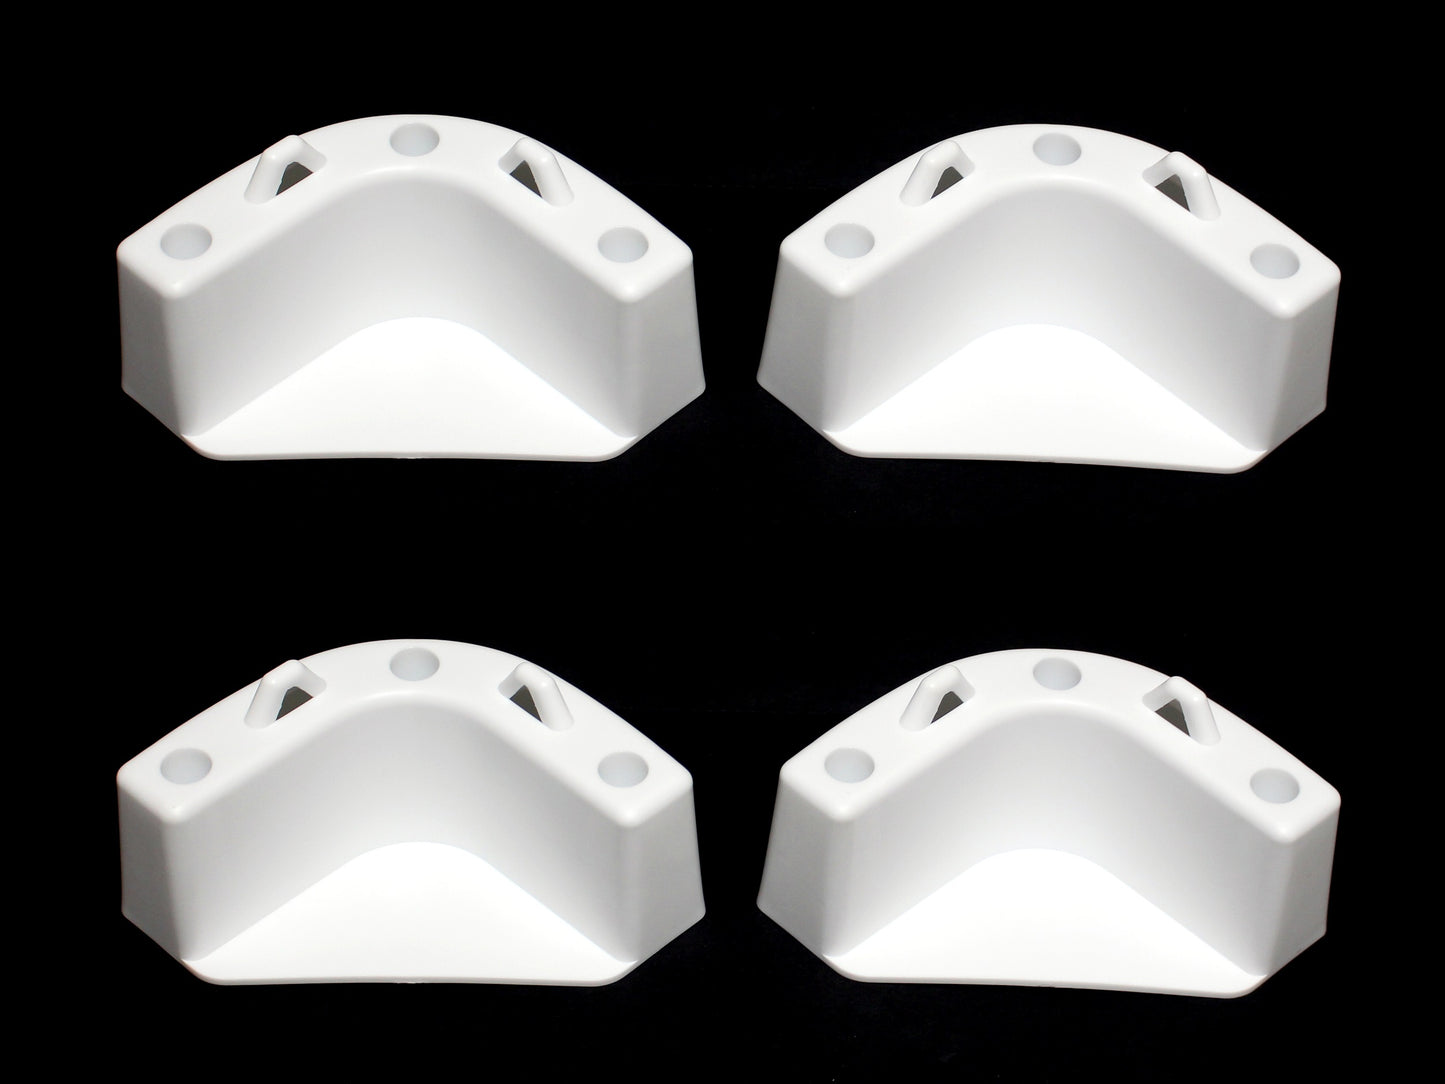 Igloo Cooler Aftermarket Plastic Replacement Parts - Hinges, Latches, 2 or 4 Hole Handles